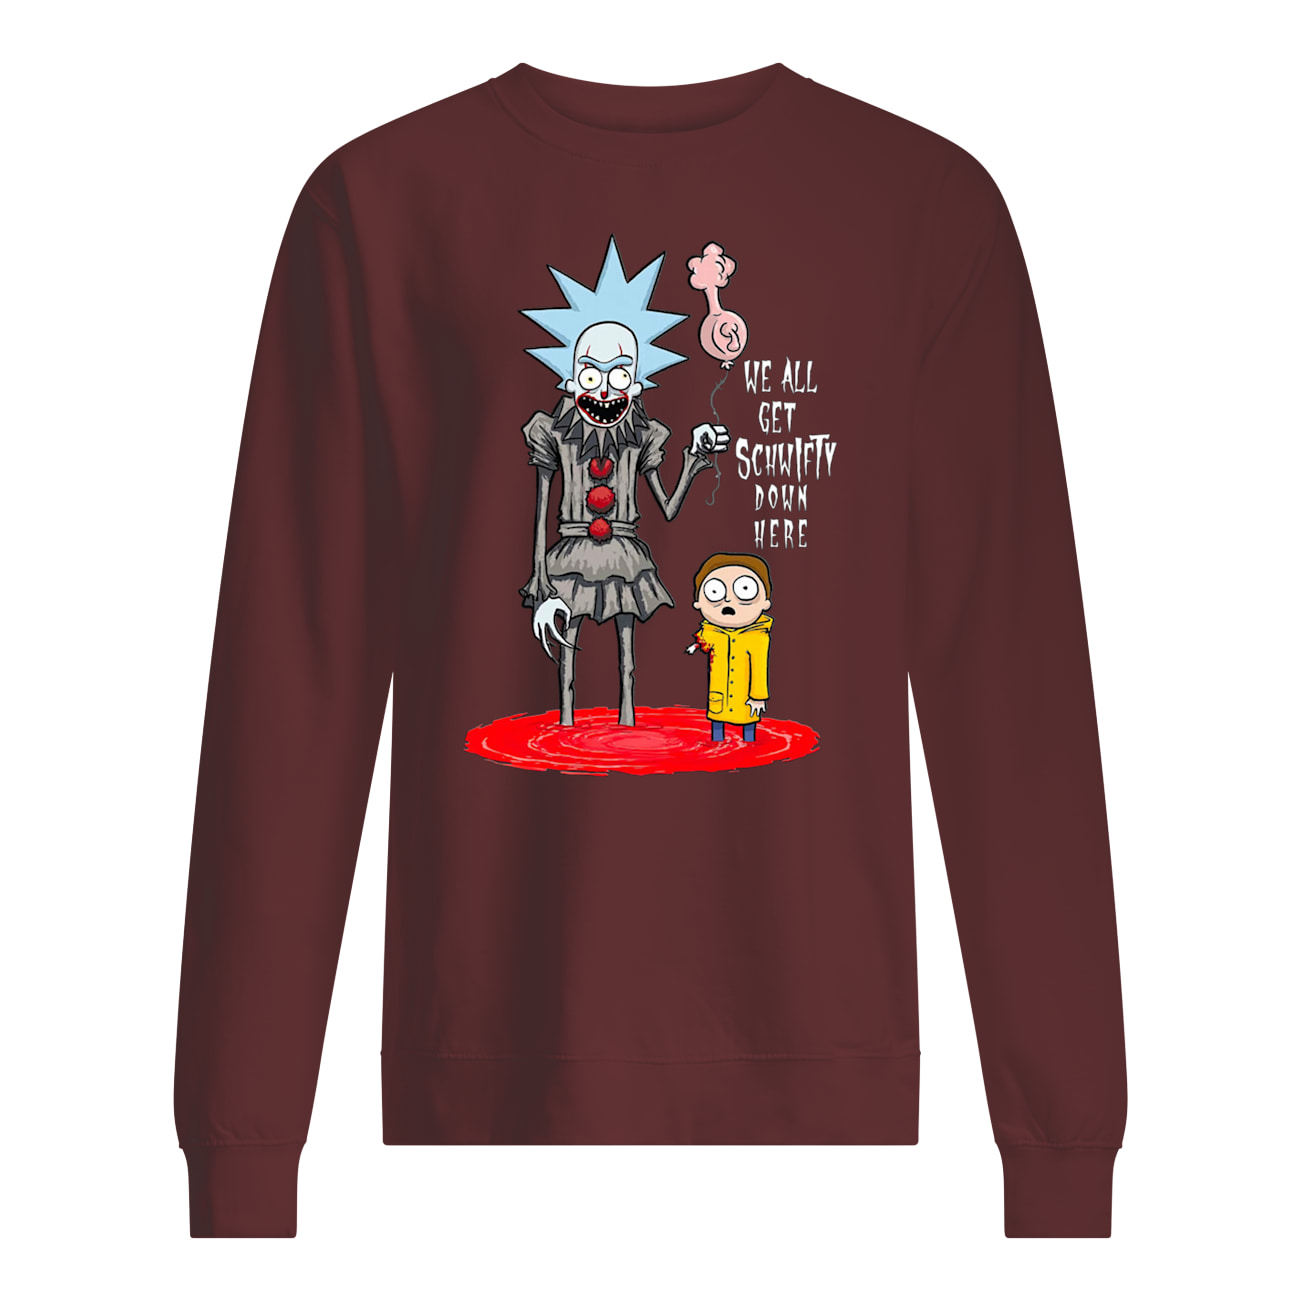 Pennywise it rick and morty we all get schwifty down here sweatshirt